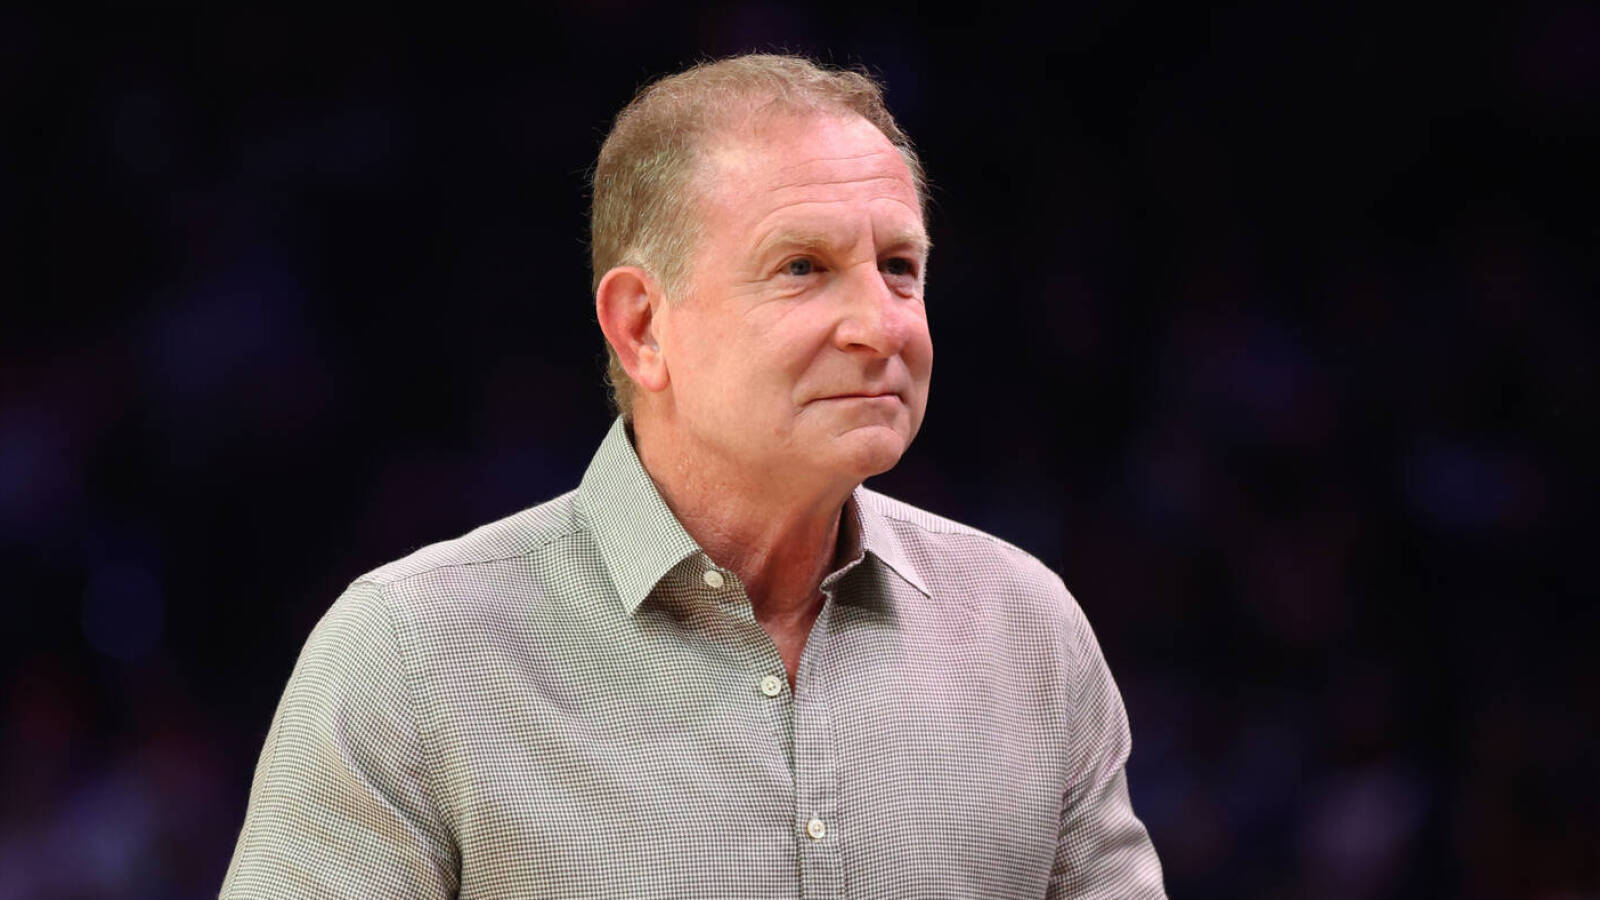 Certain Suns roster moves require Robert Sarver’s approval